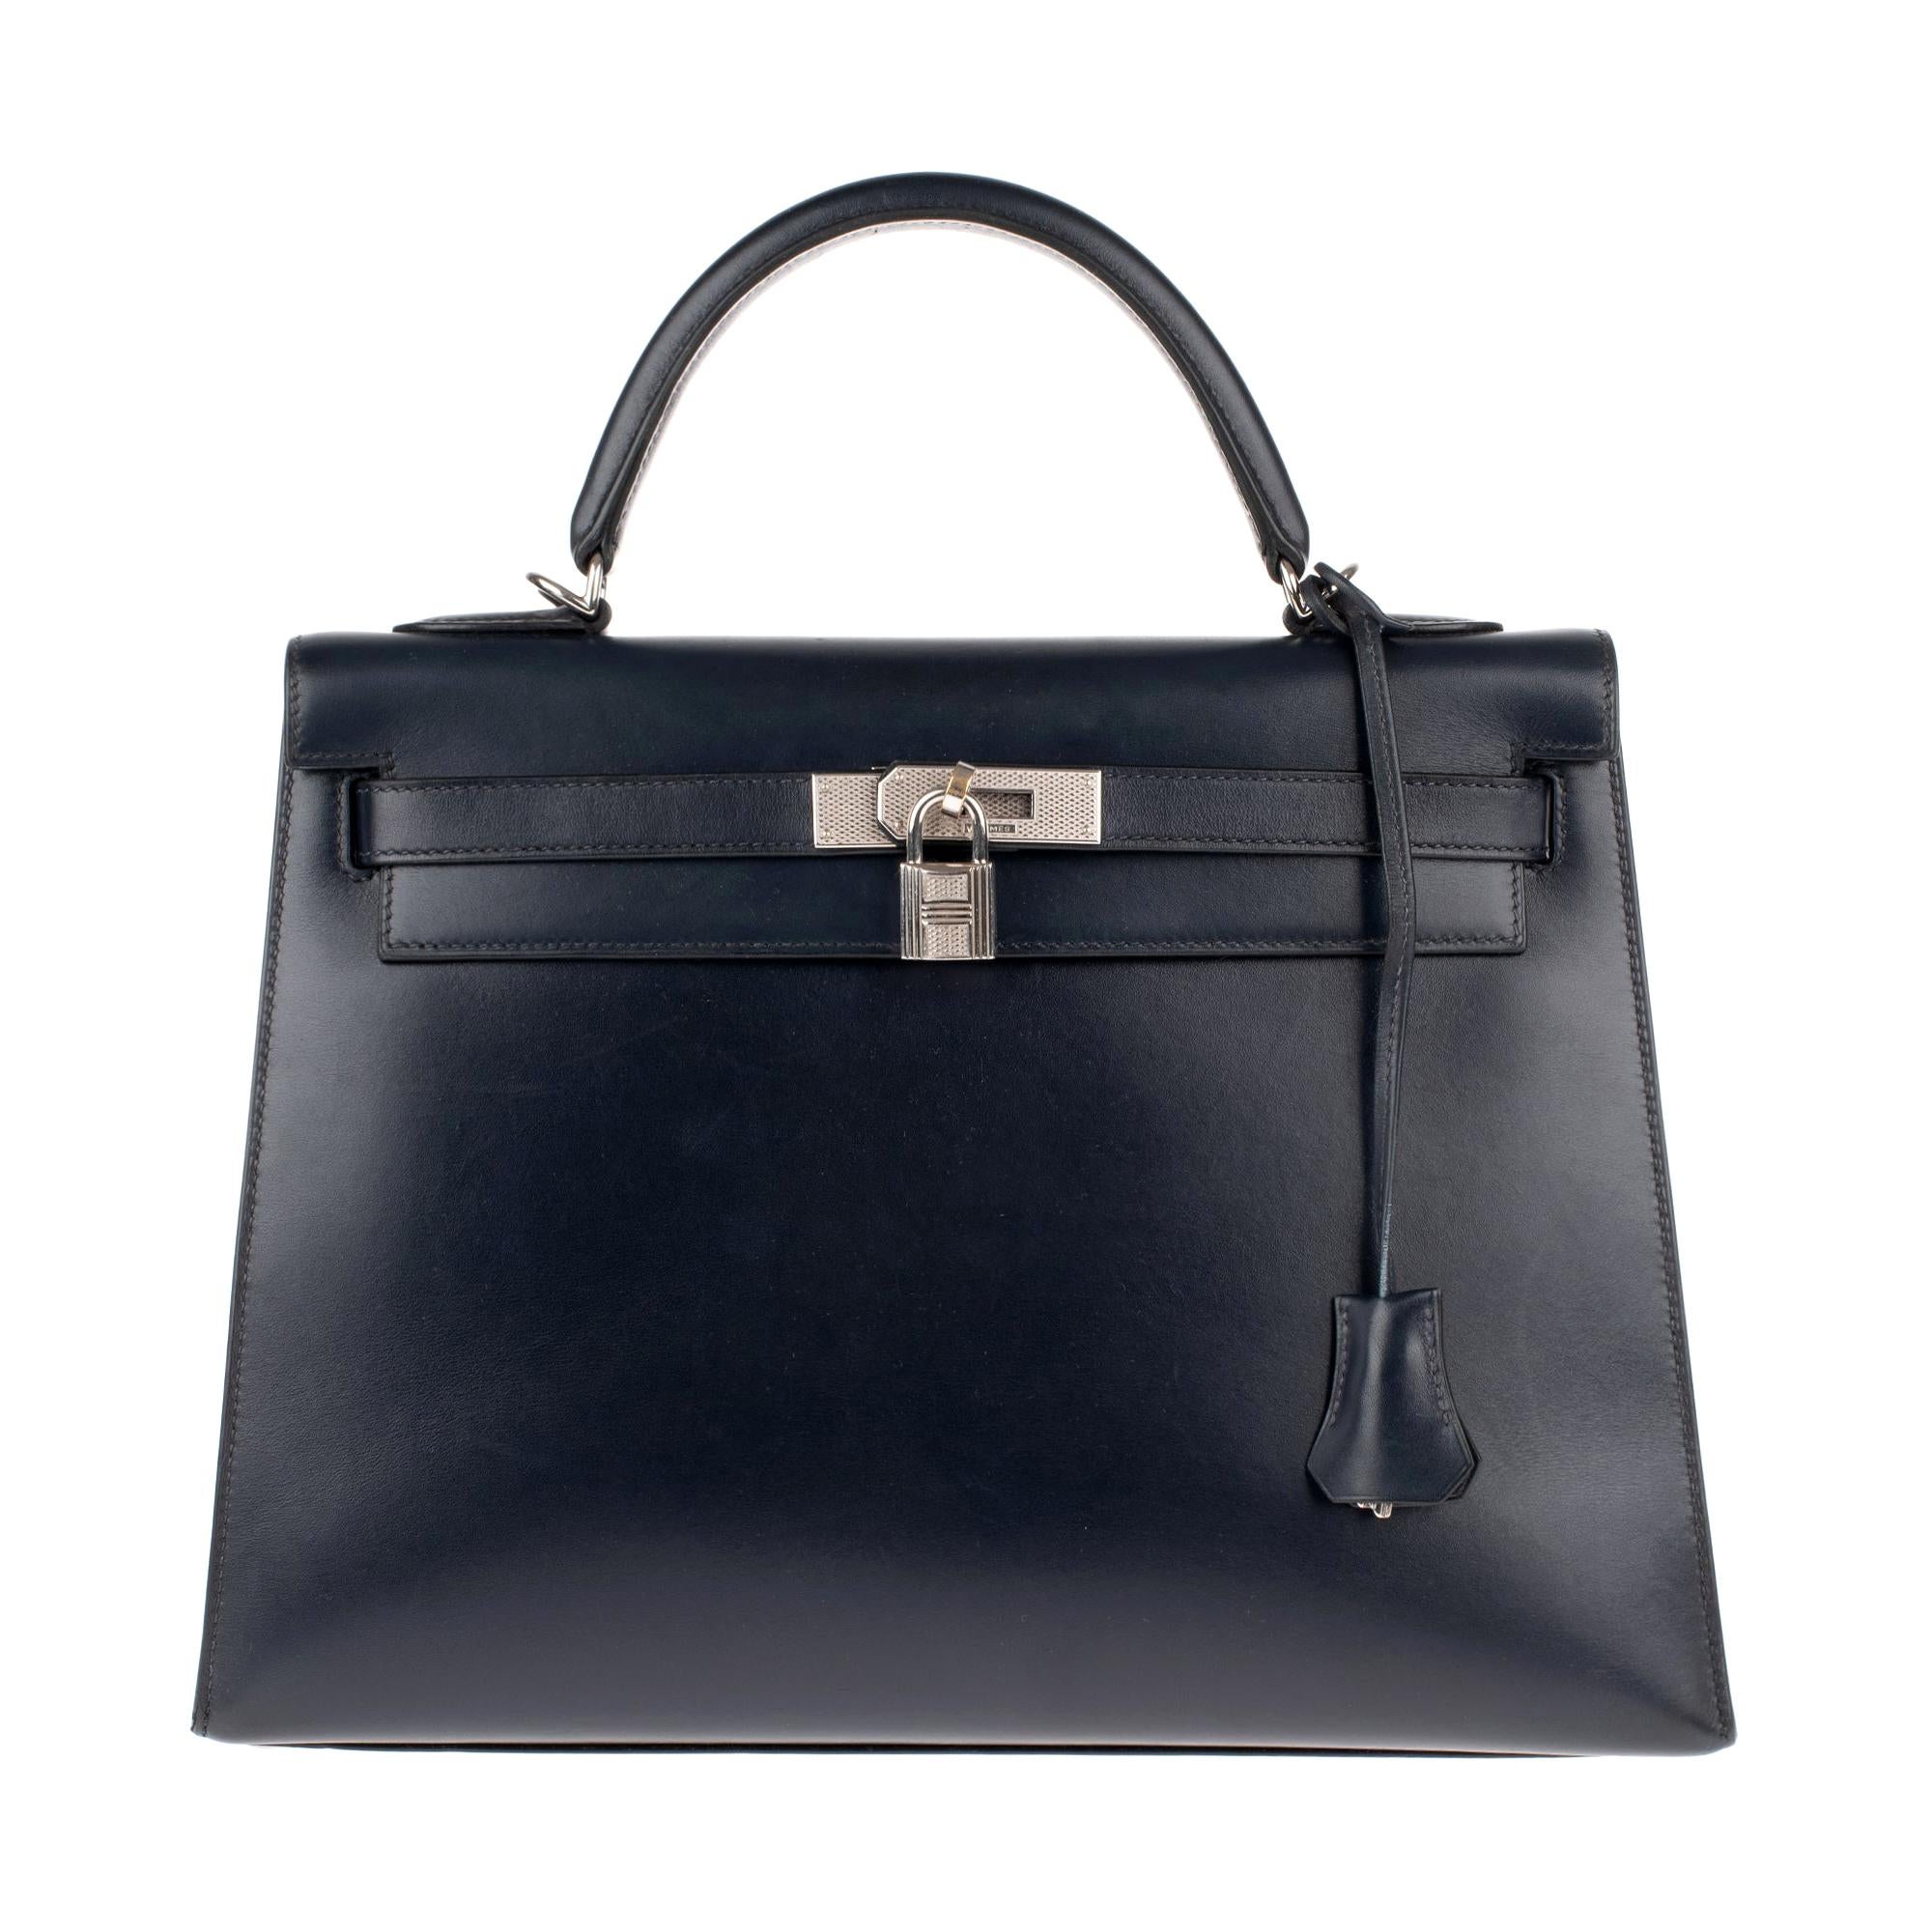 Collector Hermès Kelly 32 handbag with strap in navy blue calfskin box leather!